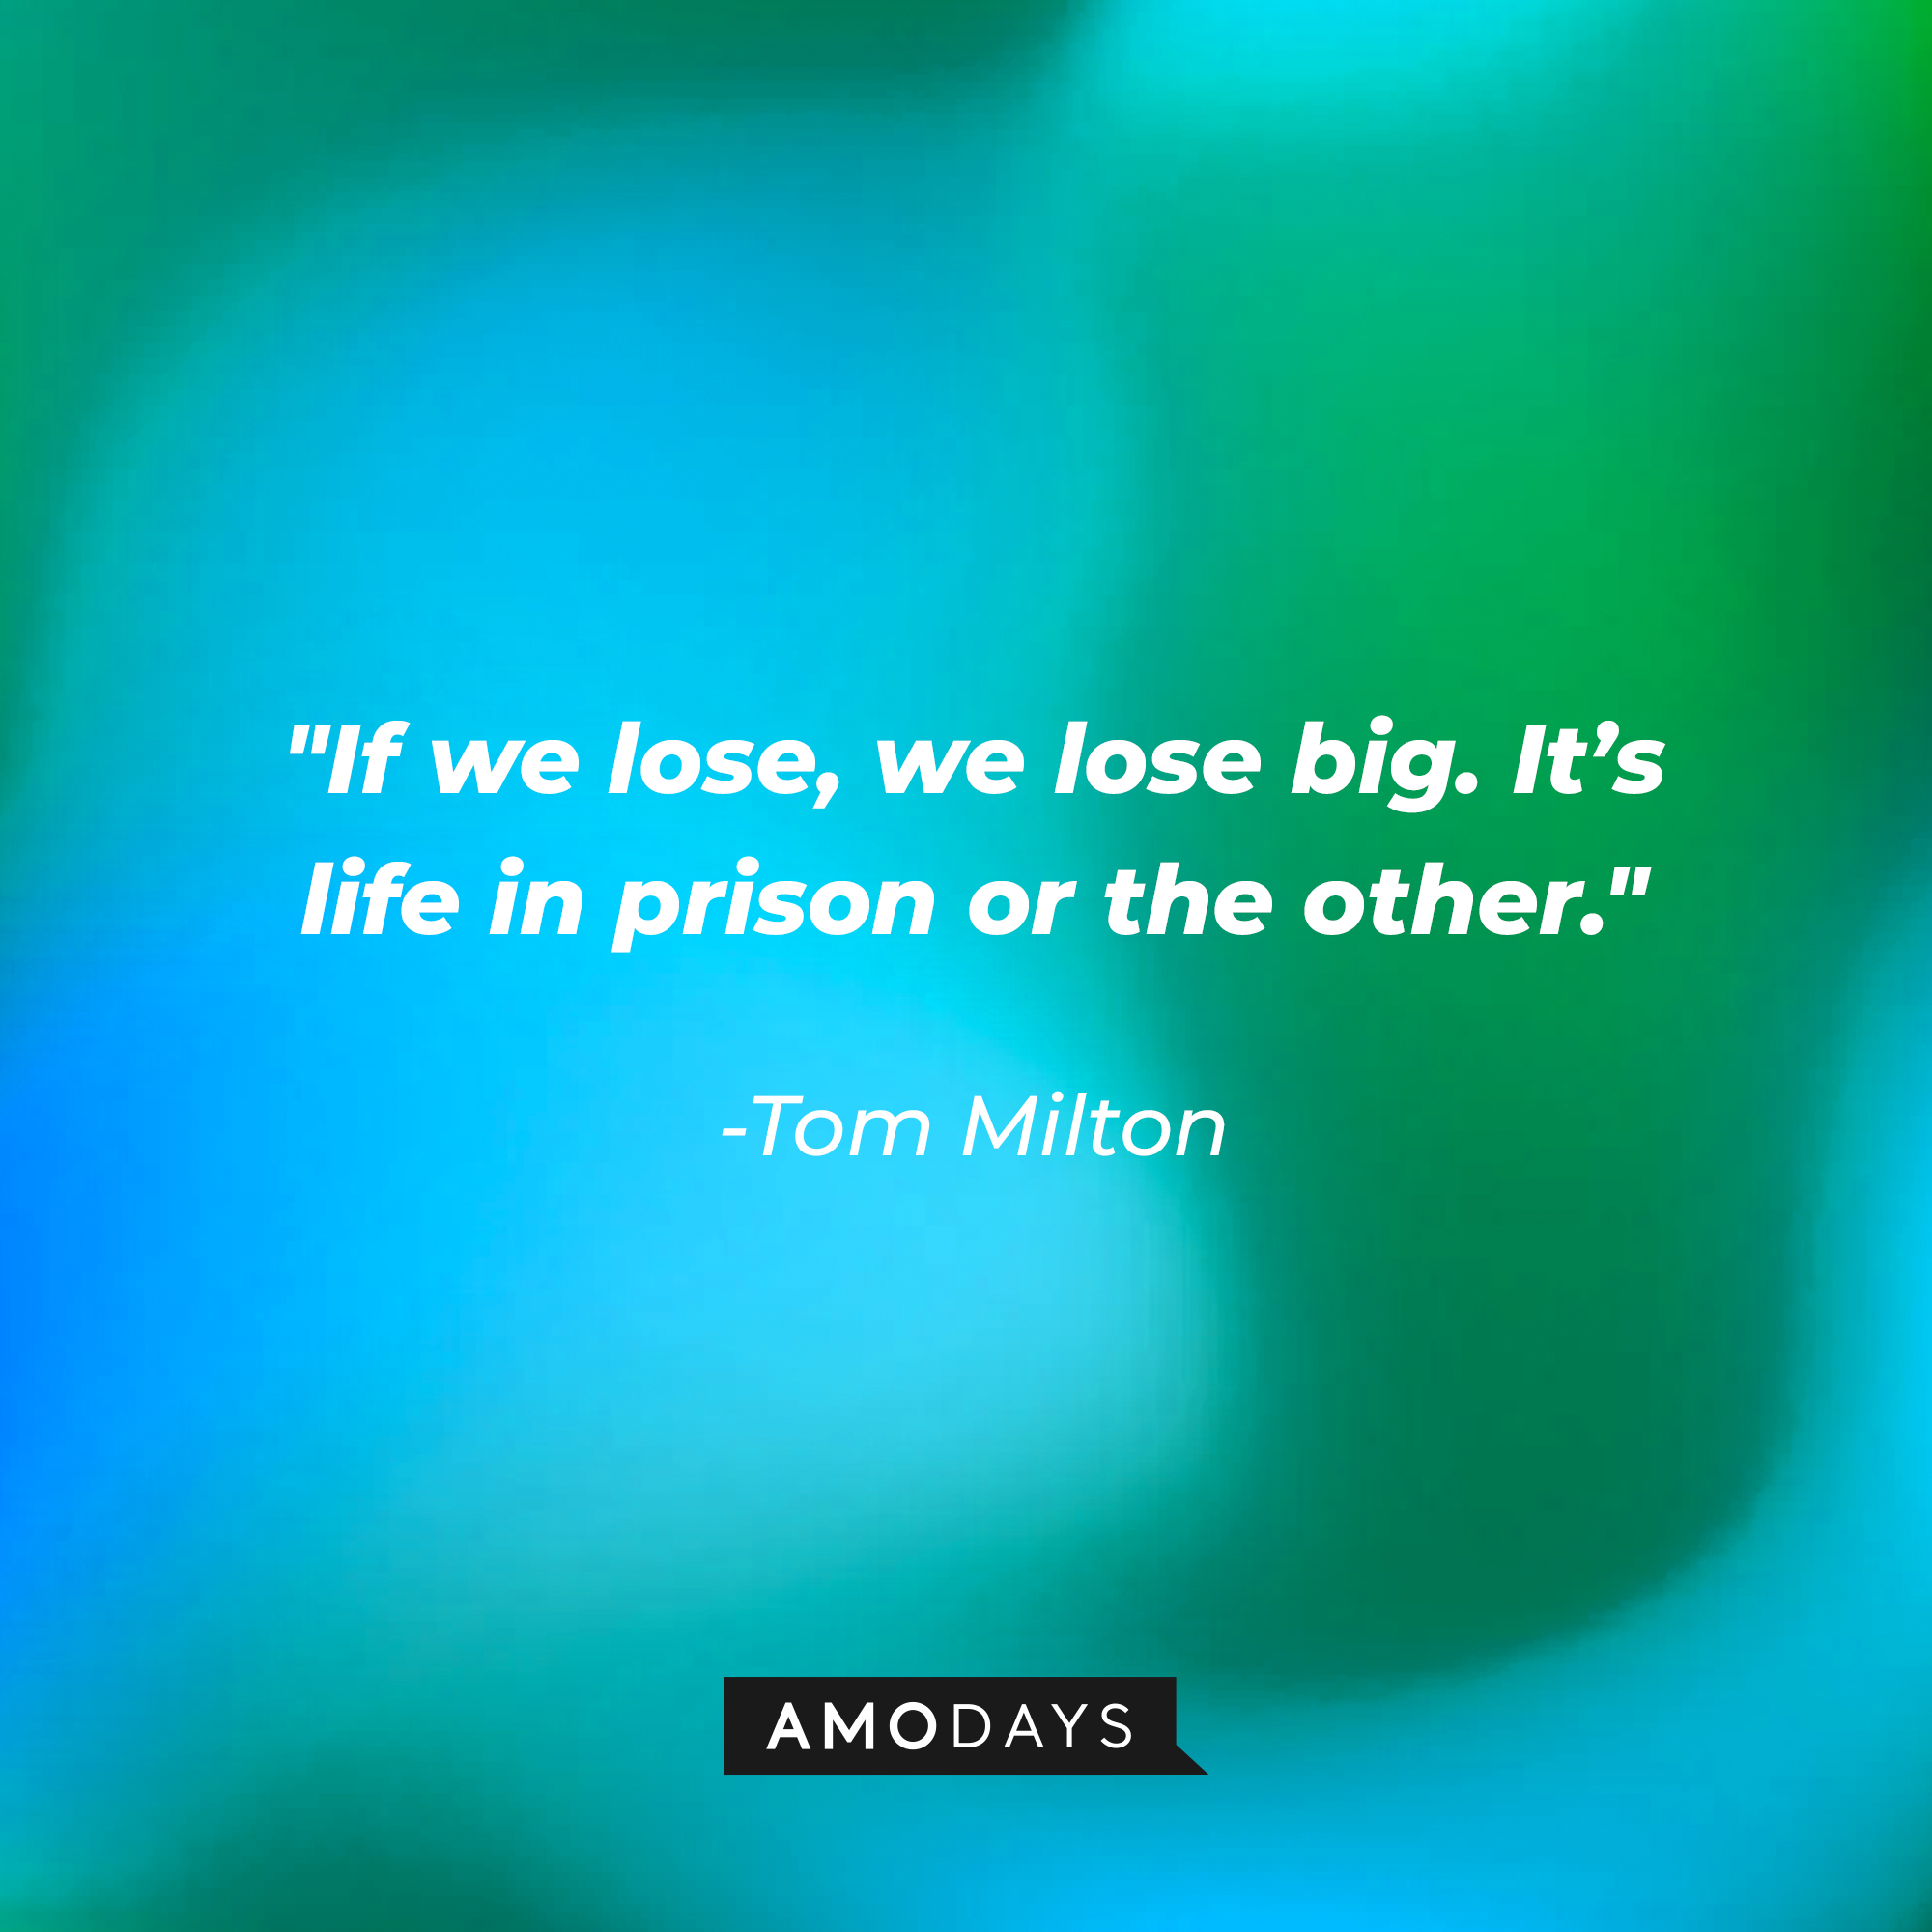 Tom Milton’s quote: "If we lose, we lose big. It’s life in prison or the other." │Source: AmoDays